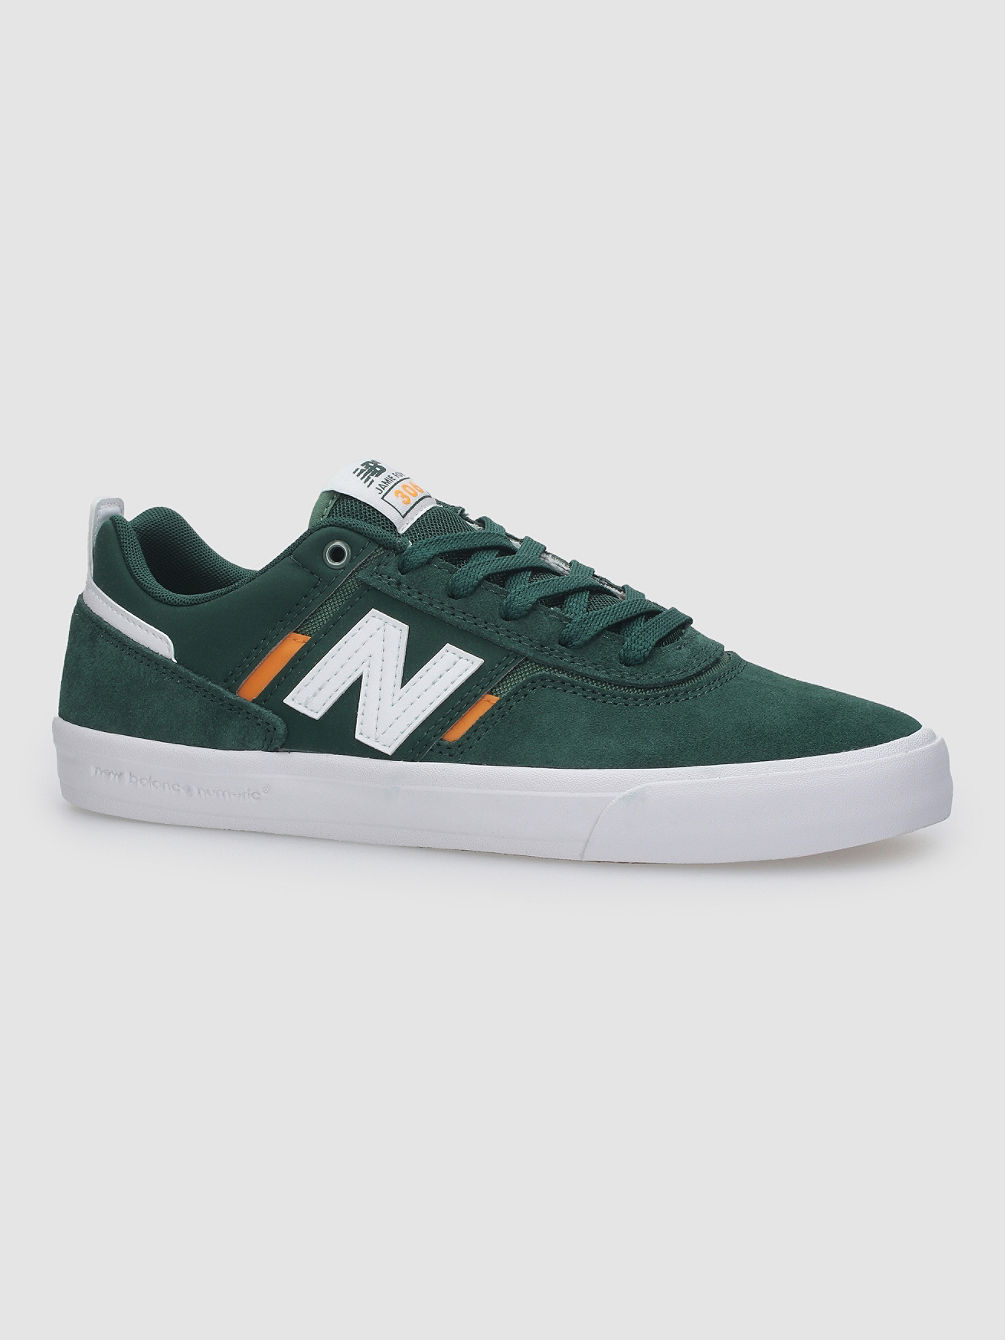 NM306FOR Chaussures de skate